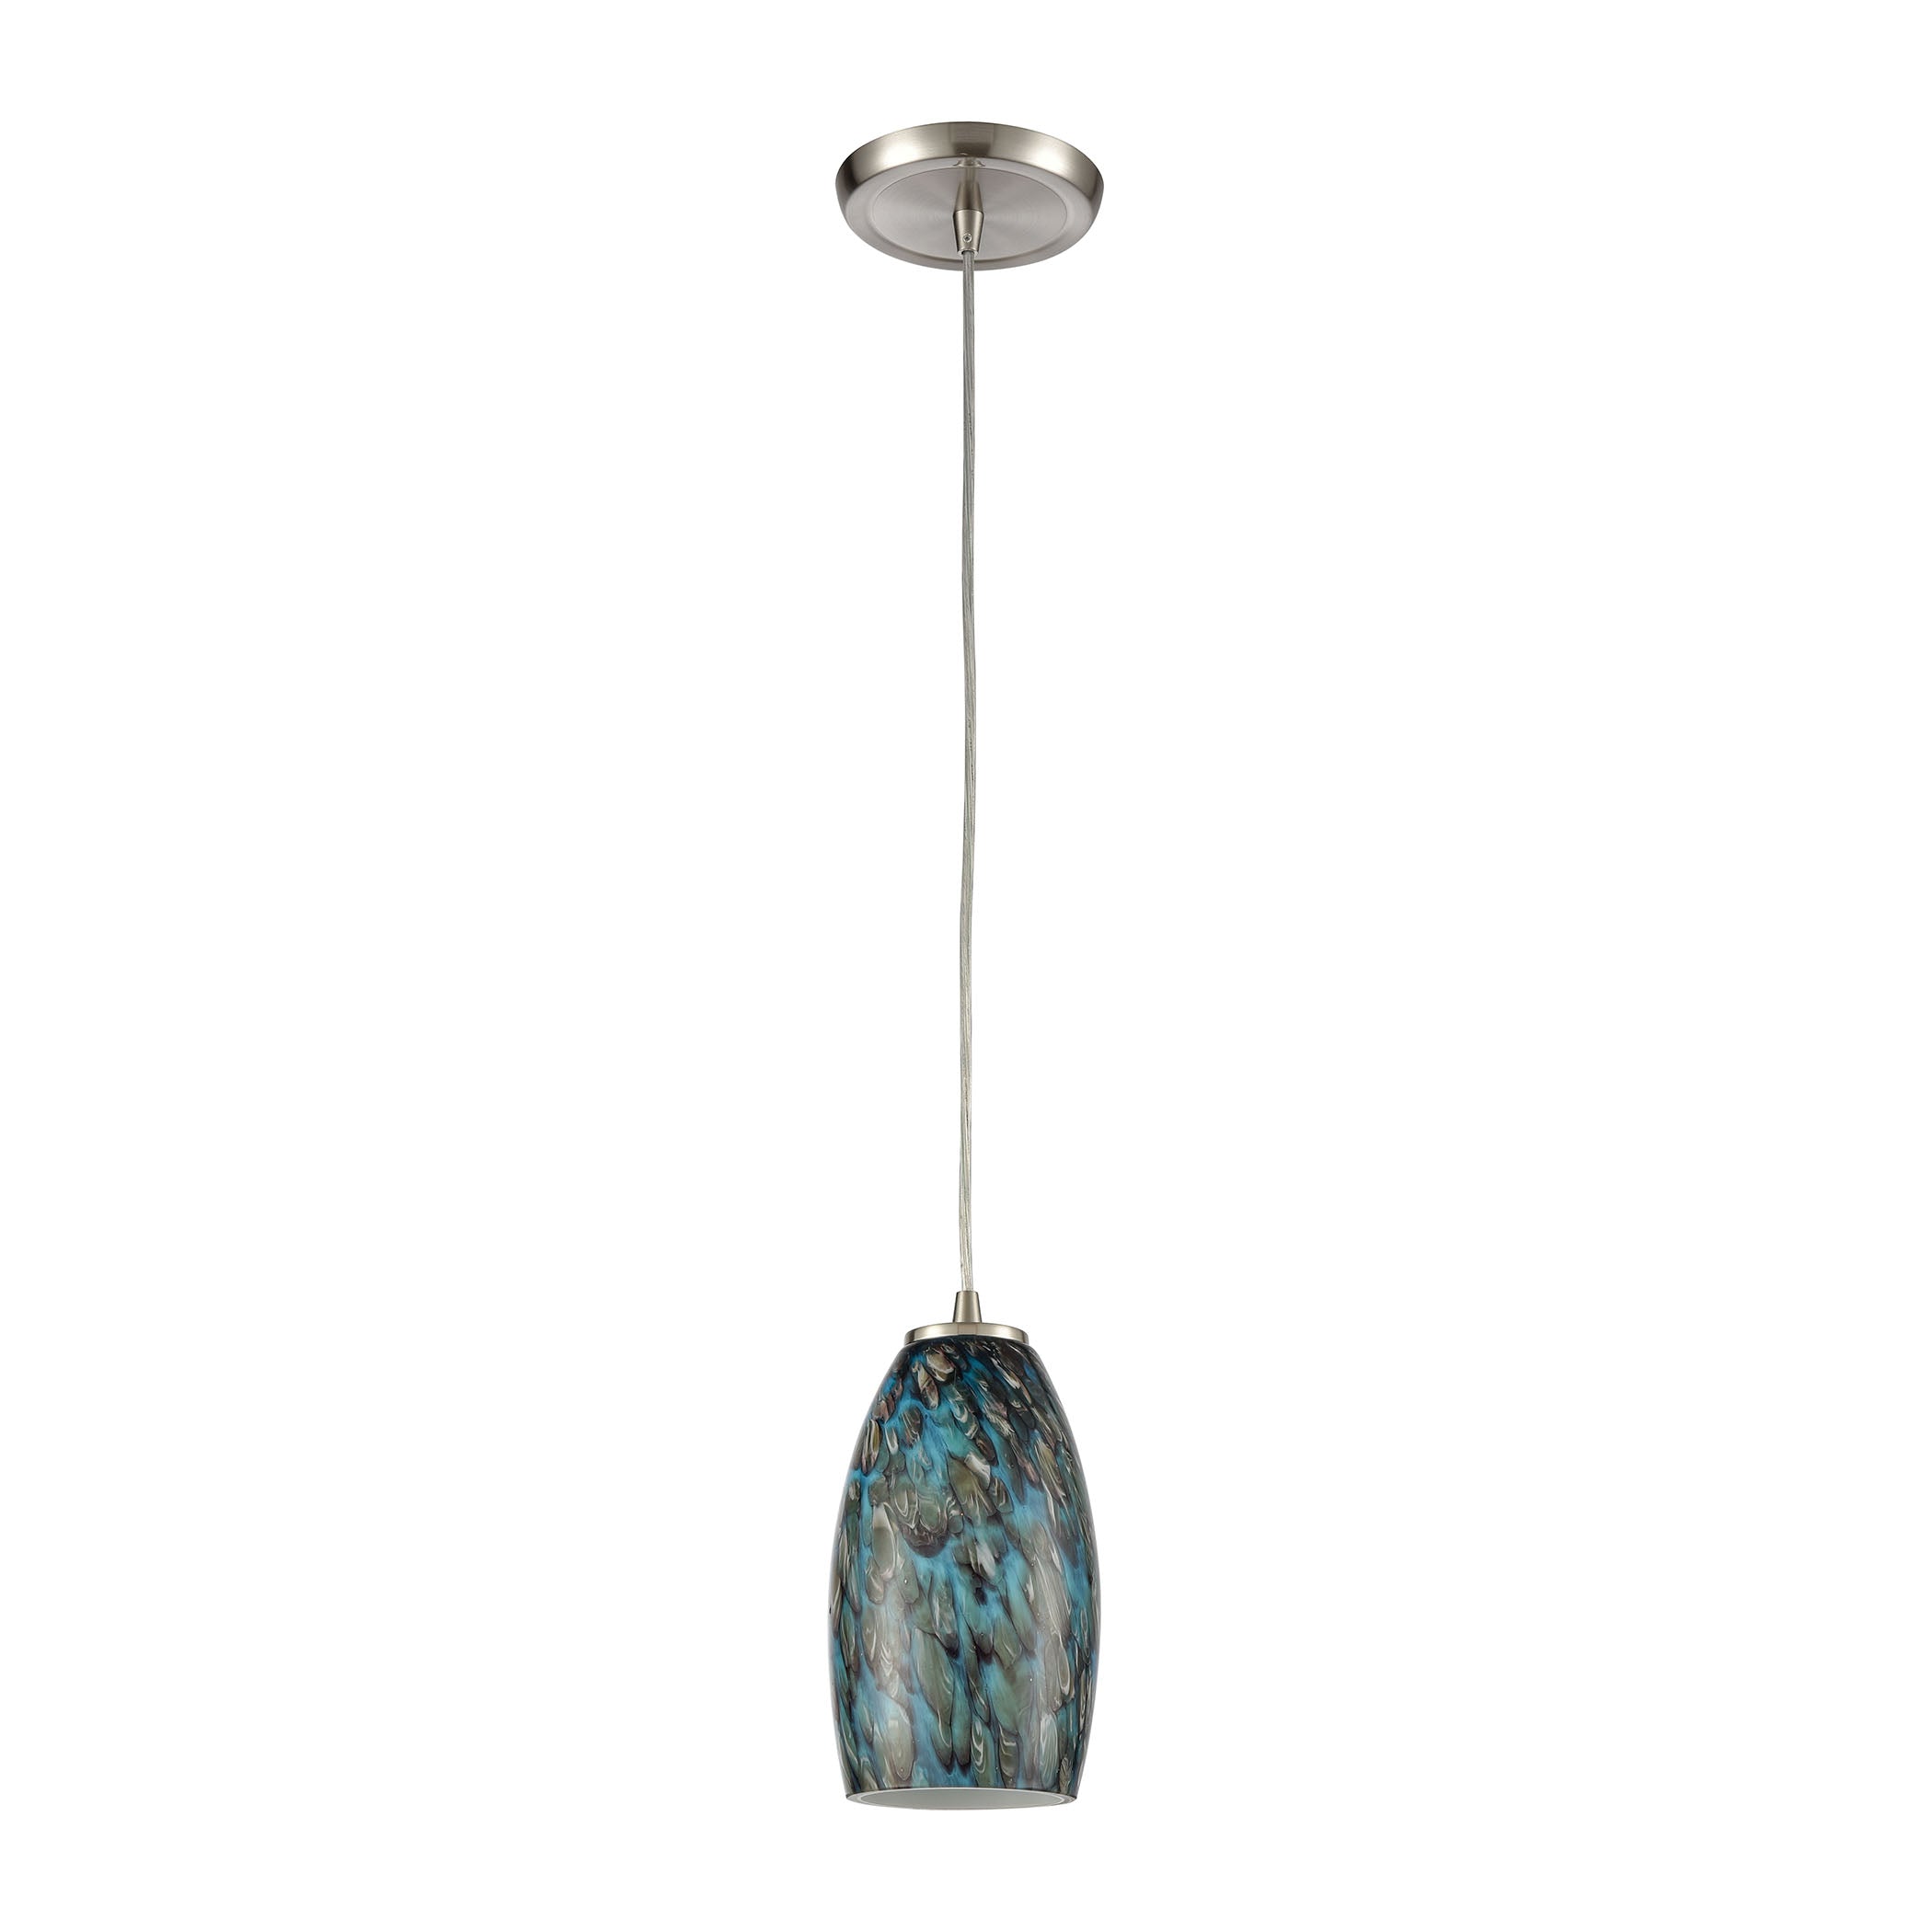 ELK Lighting 60217/1 Nature's Collage 1-Light Mini Pendant in Satin Nickel with Feathered Aqua Green and Beige Glass